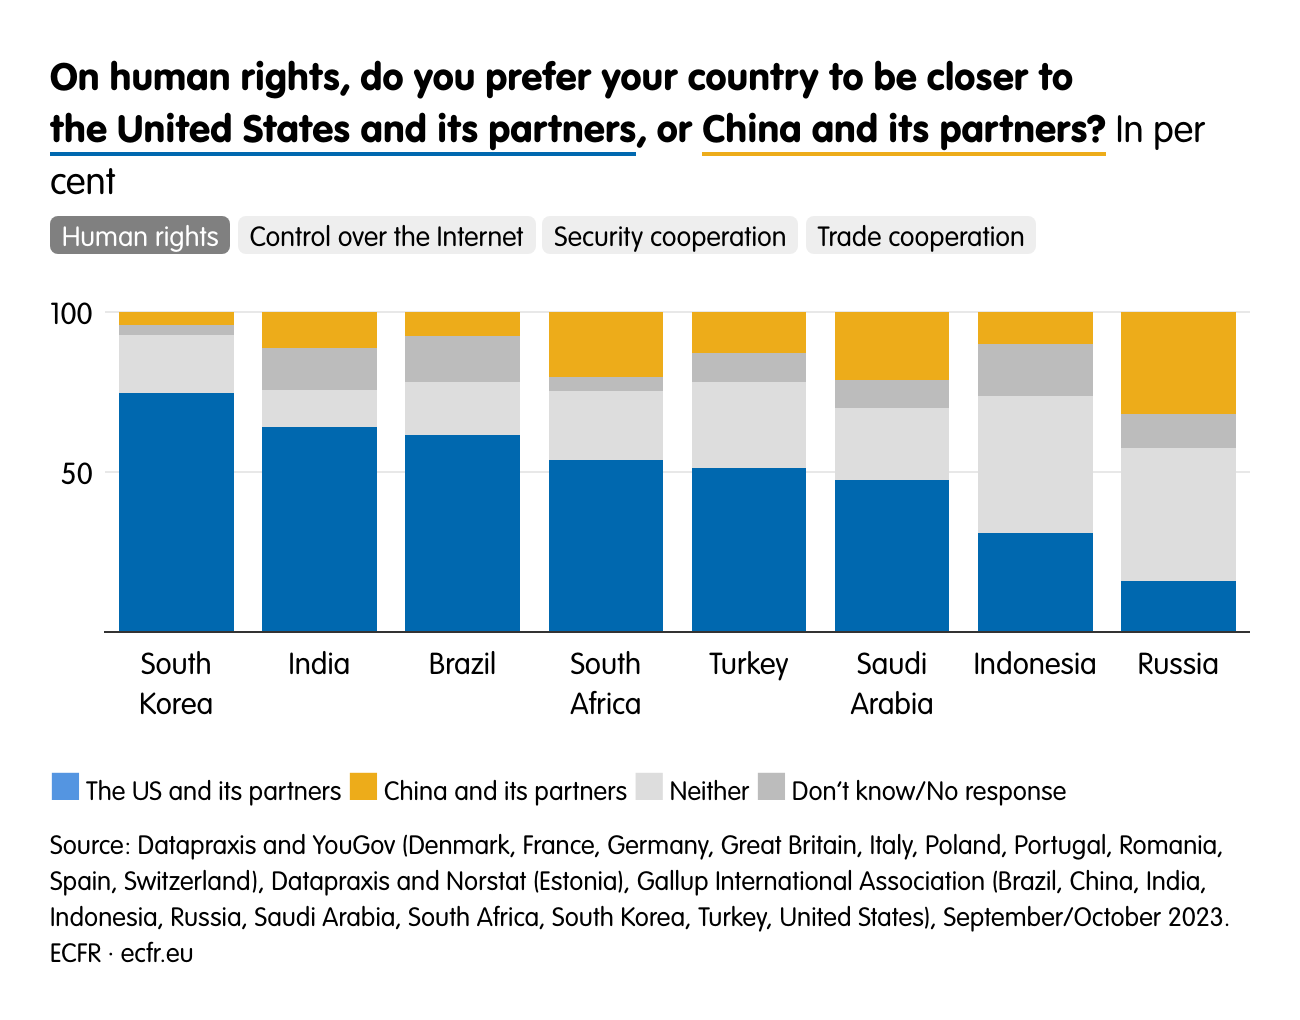 On human rights, do you prefer your country to be closer to  the United States and its partners, or China and its partners?